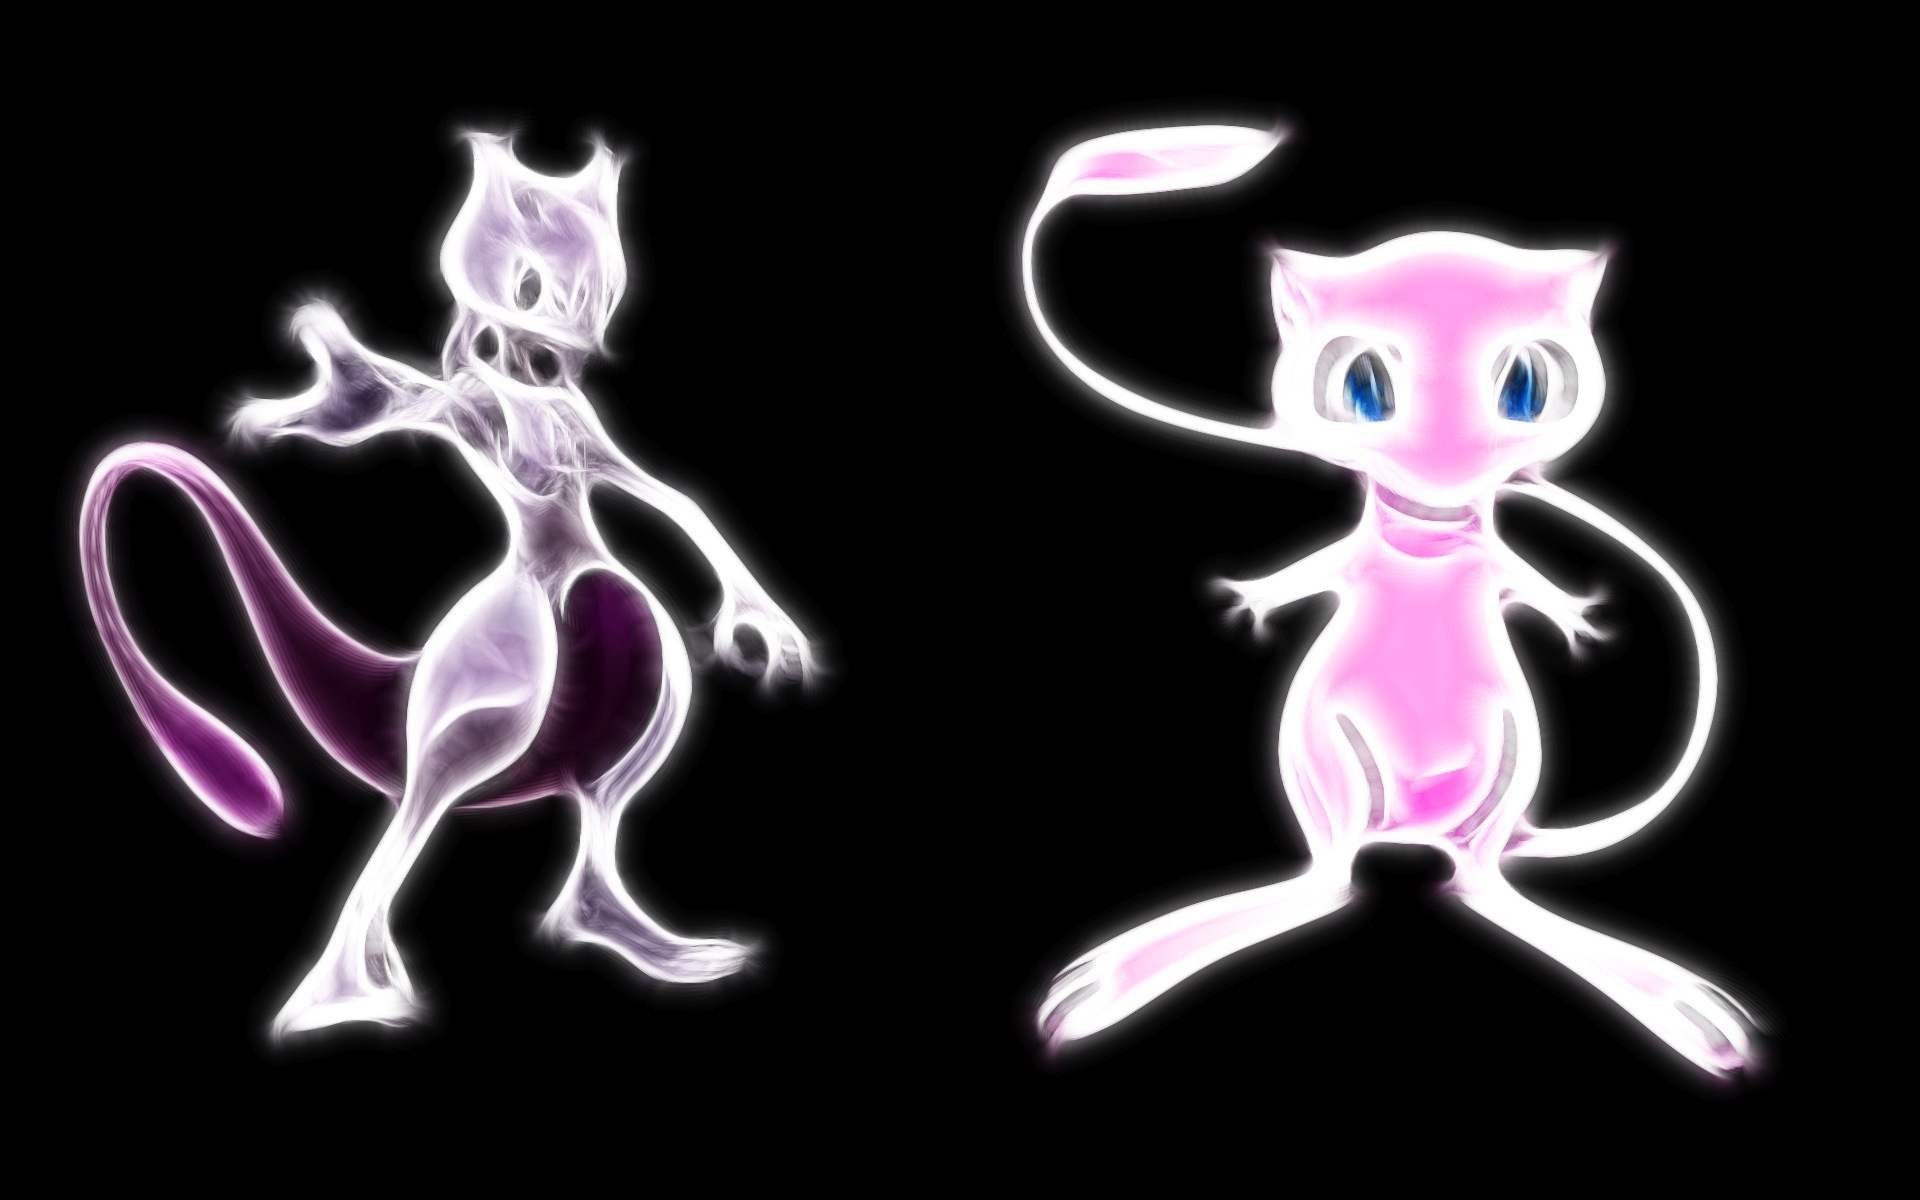 Download the Pokemon anime wallpaper titled: 'Mewtwo and Mew'.